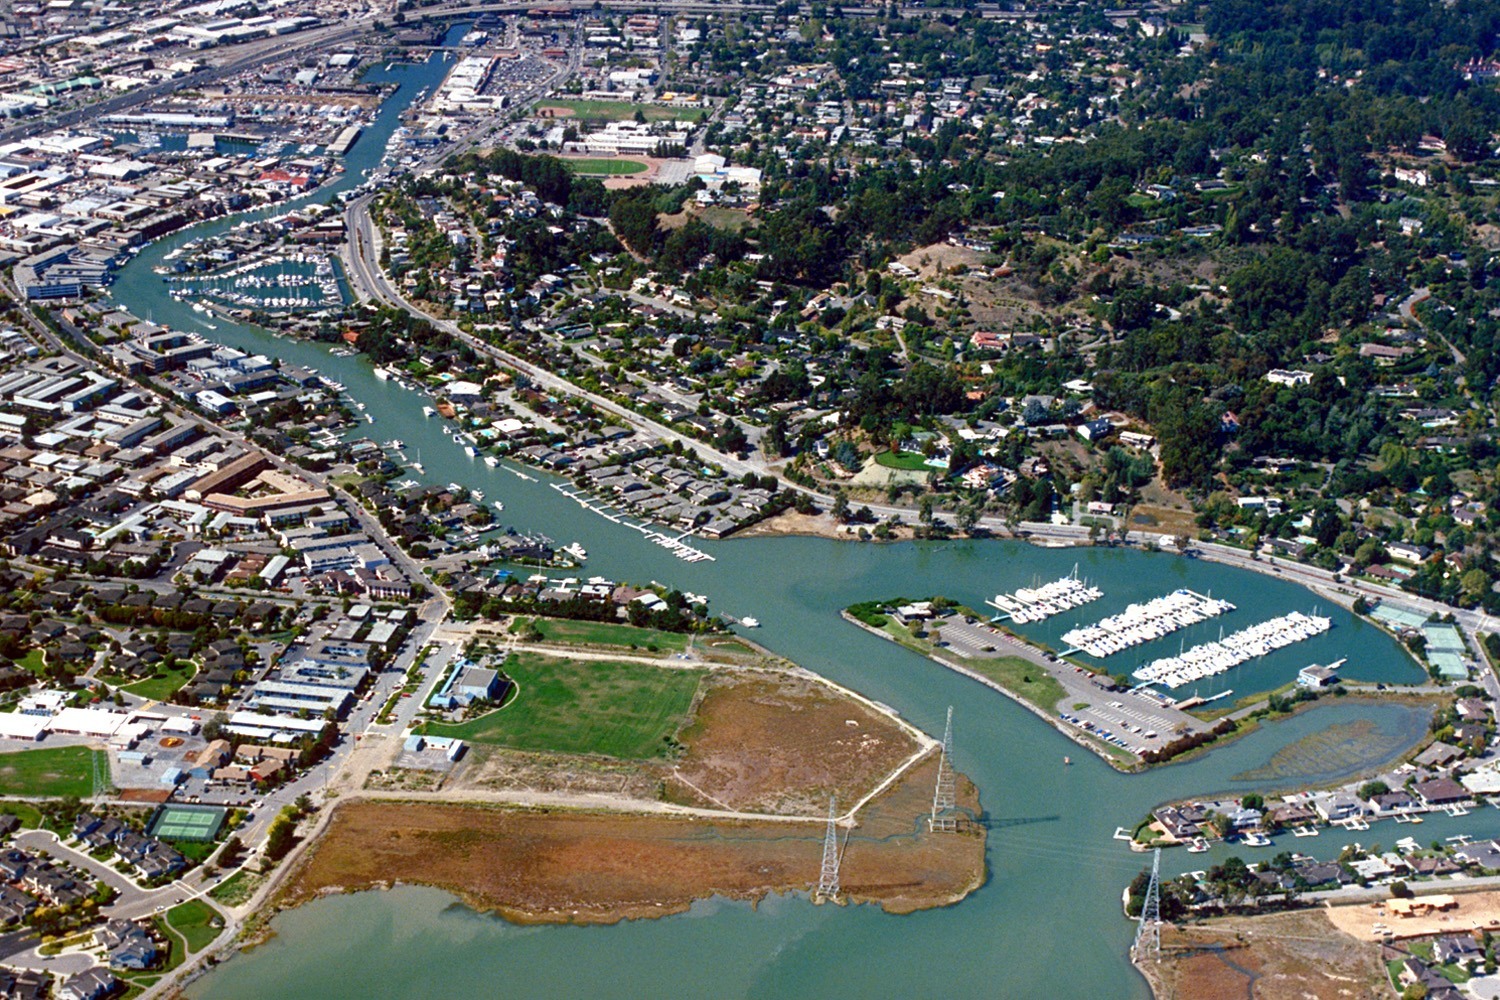 San Rafael: A Nice Place to Live and Work